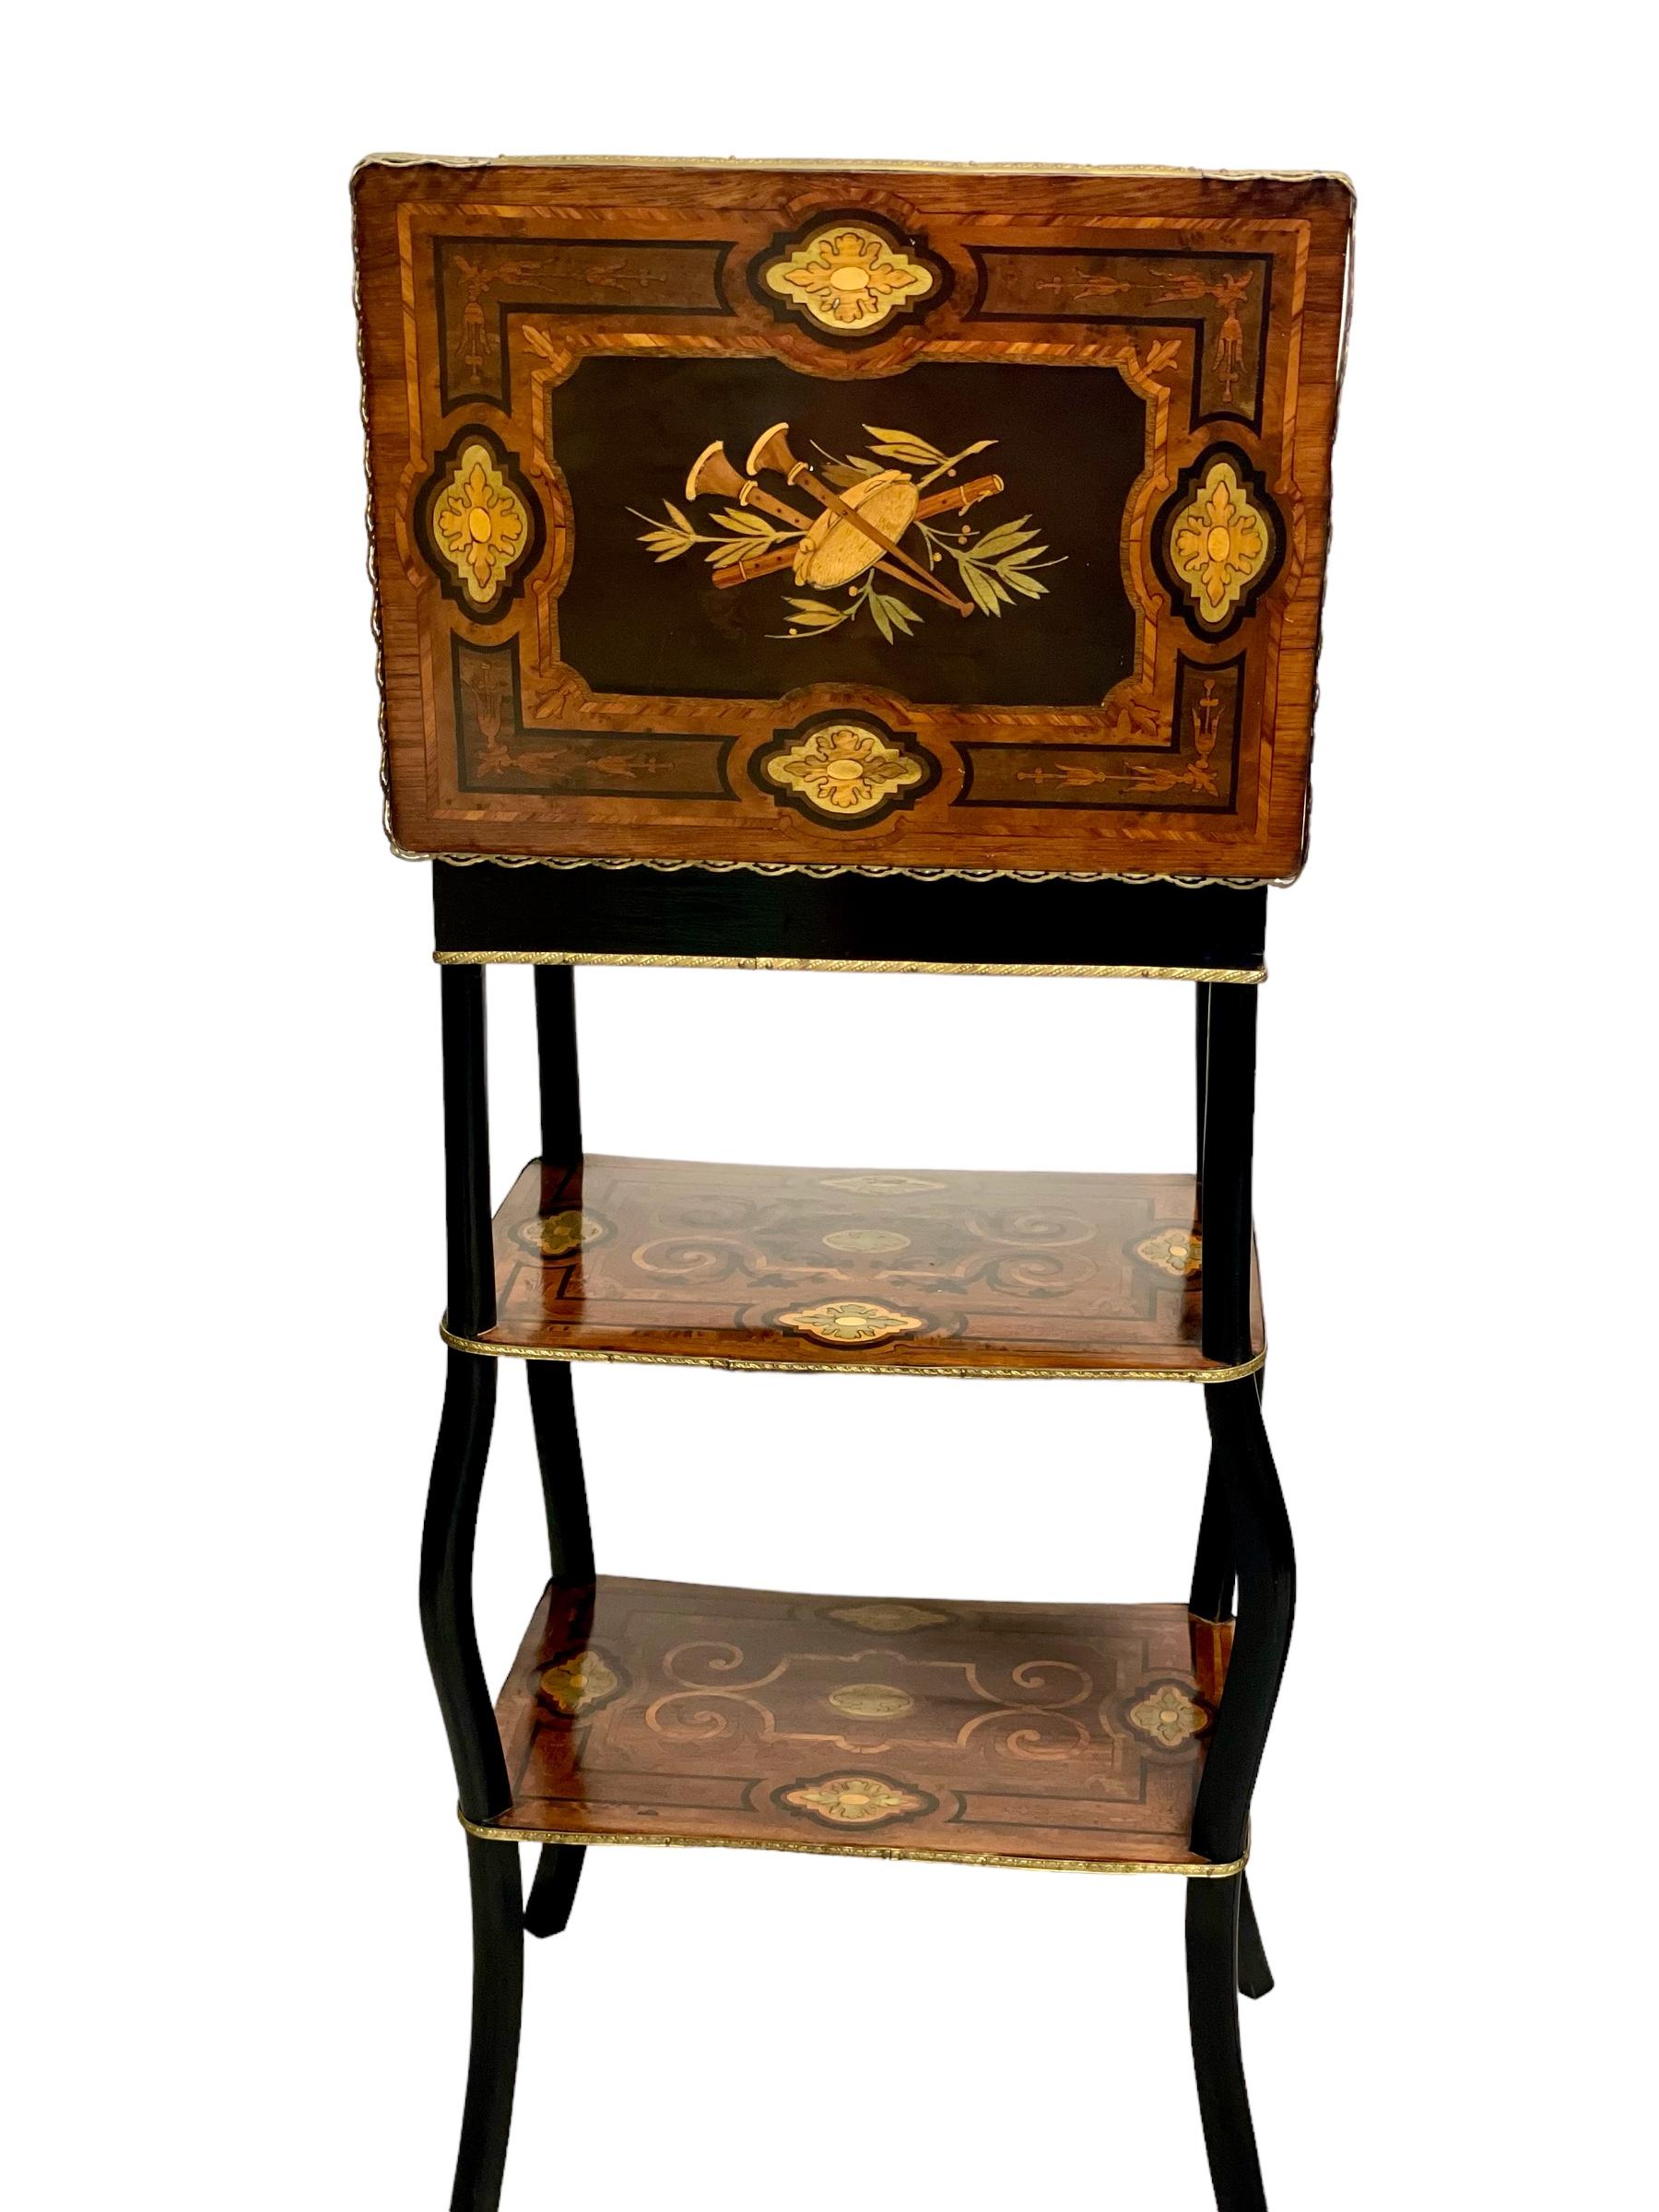 Napoleon III Period Vanity Table or French Travailleuse For Sale 3